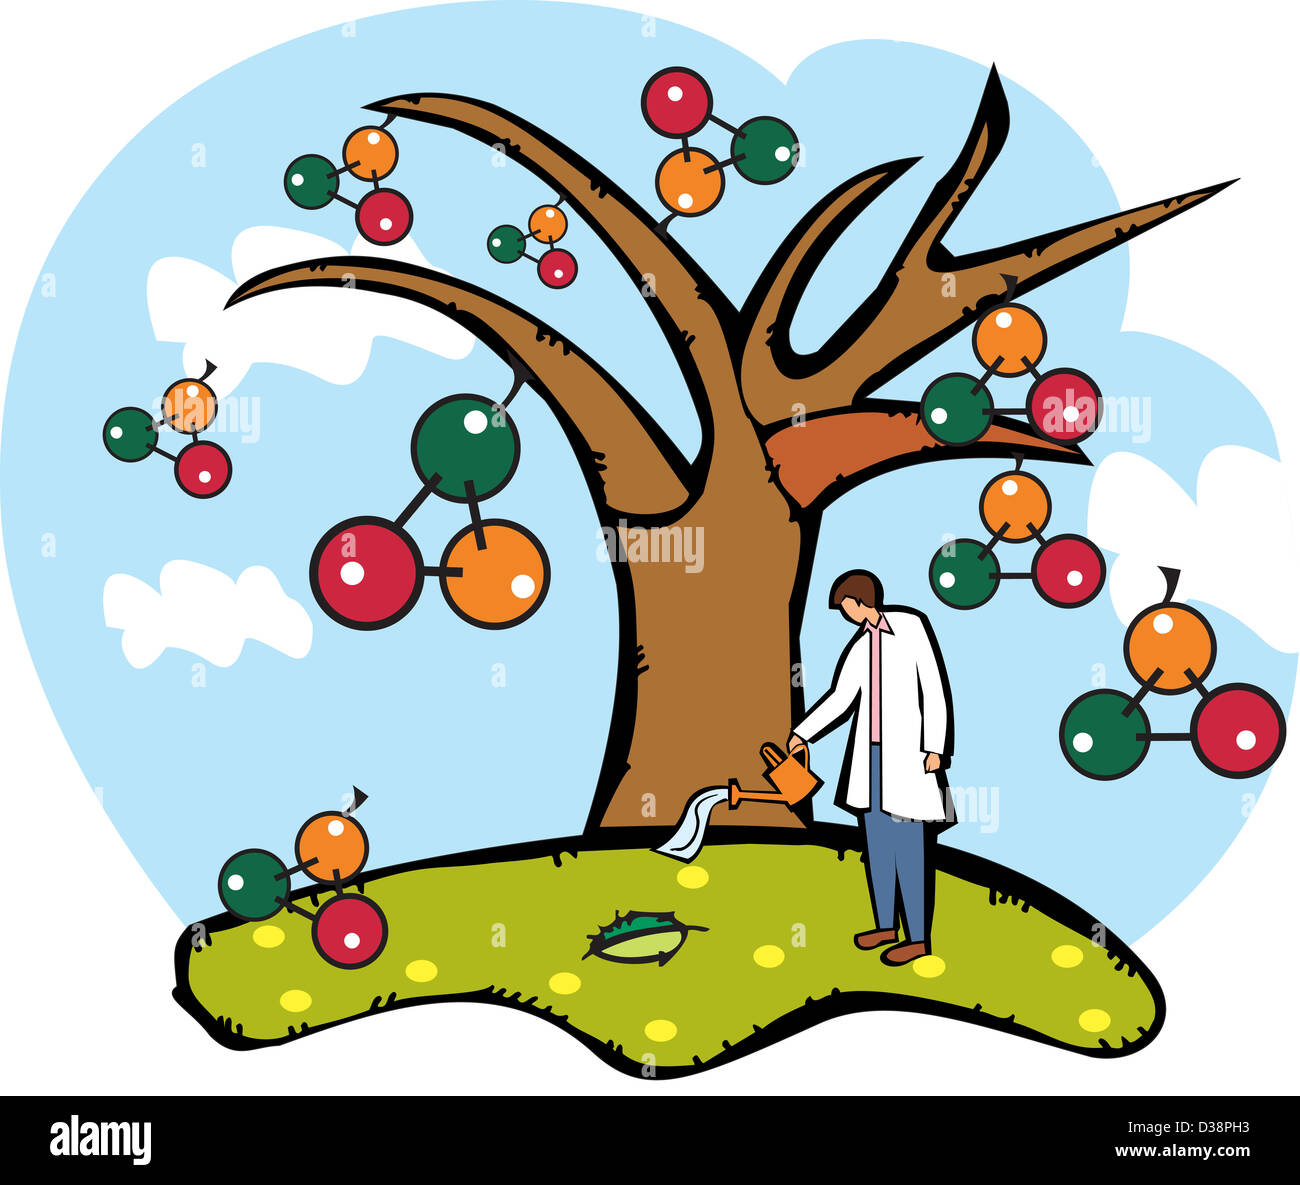 Scientist watering an atomic structure tree Stock Photo